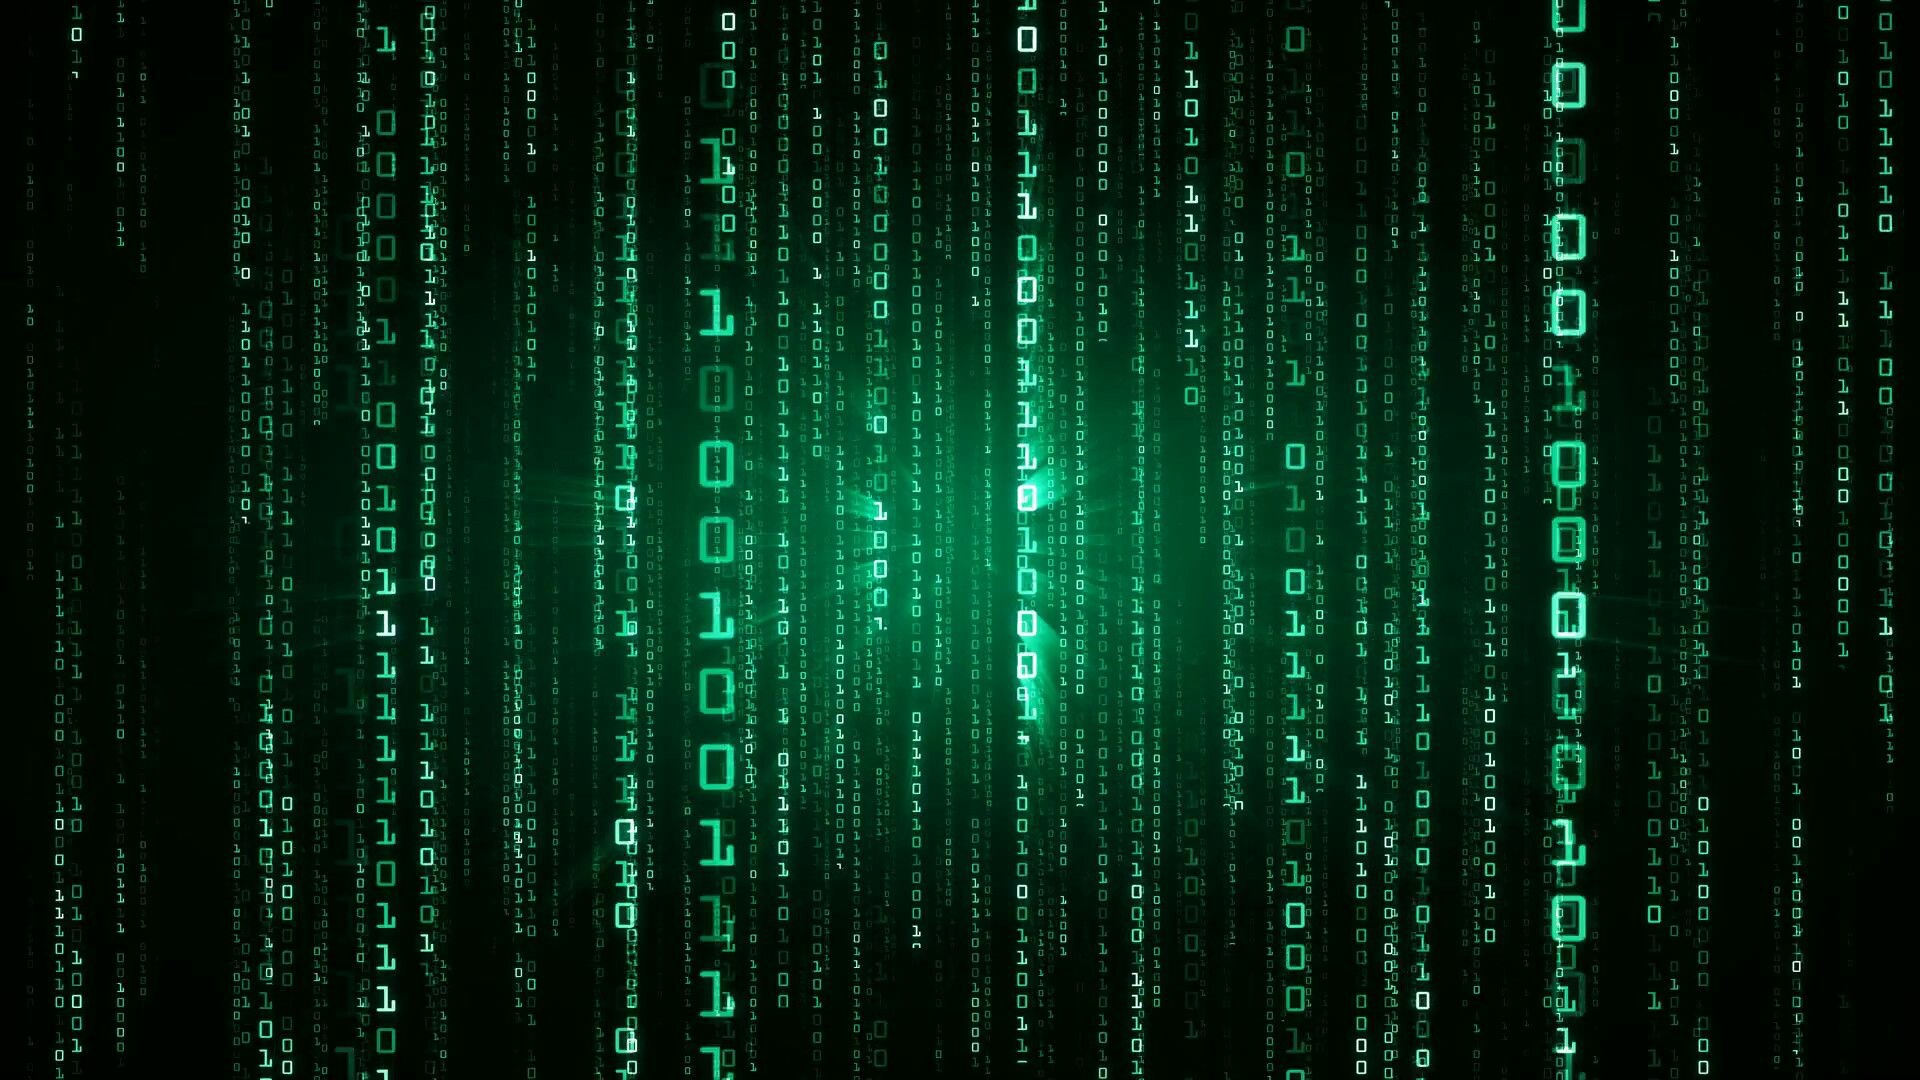 Matrix Franchise: Digital code, A way of representing the activity of the simulated reality environment of the Matrix on screen by kinetic typography. 1920x1080 Full HD Background.